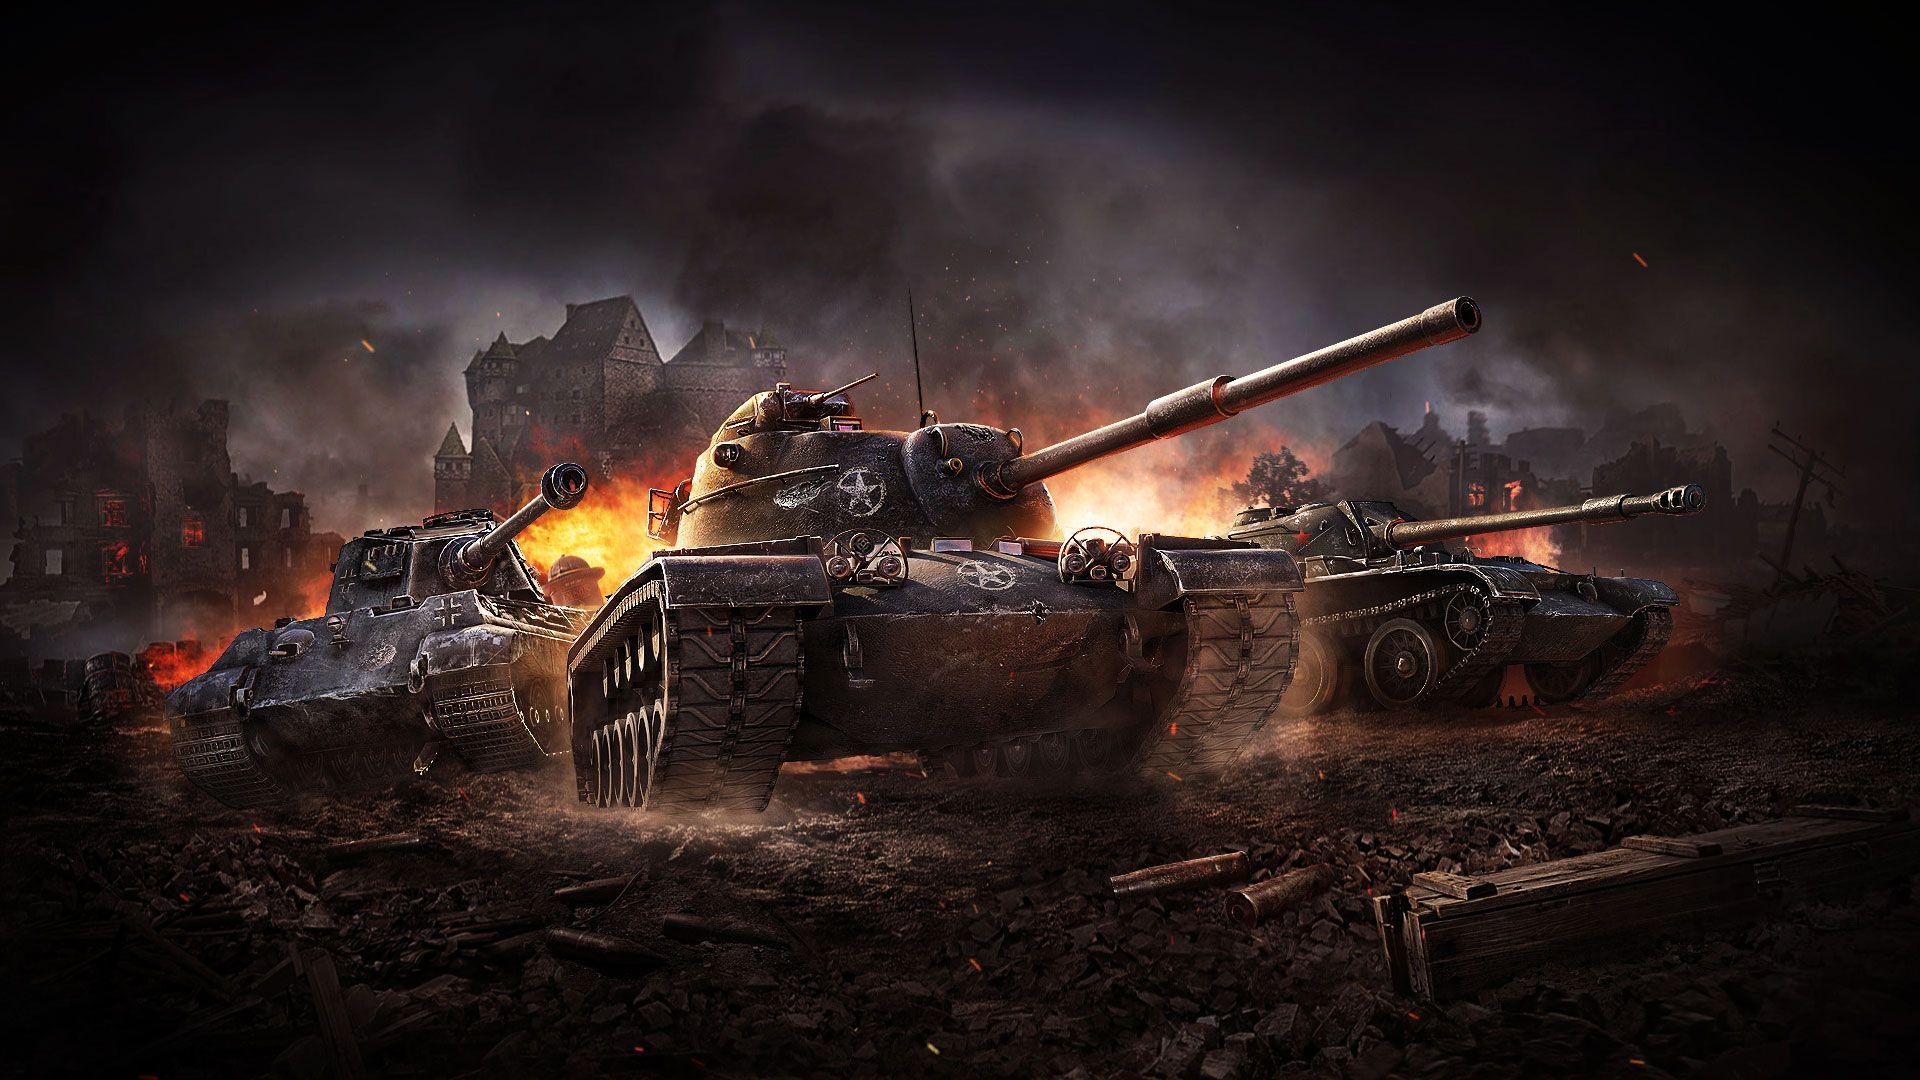 World Of Tanks Blitz Wallpapers Top Free World Of Tanks Blitz Backgrounds Wallpaperaccess